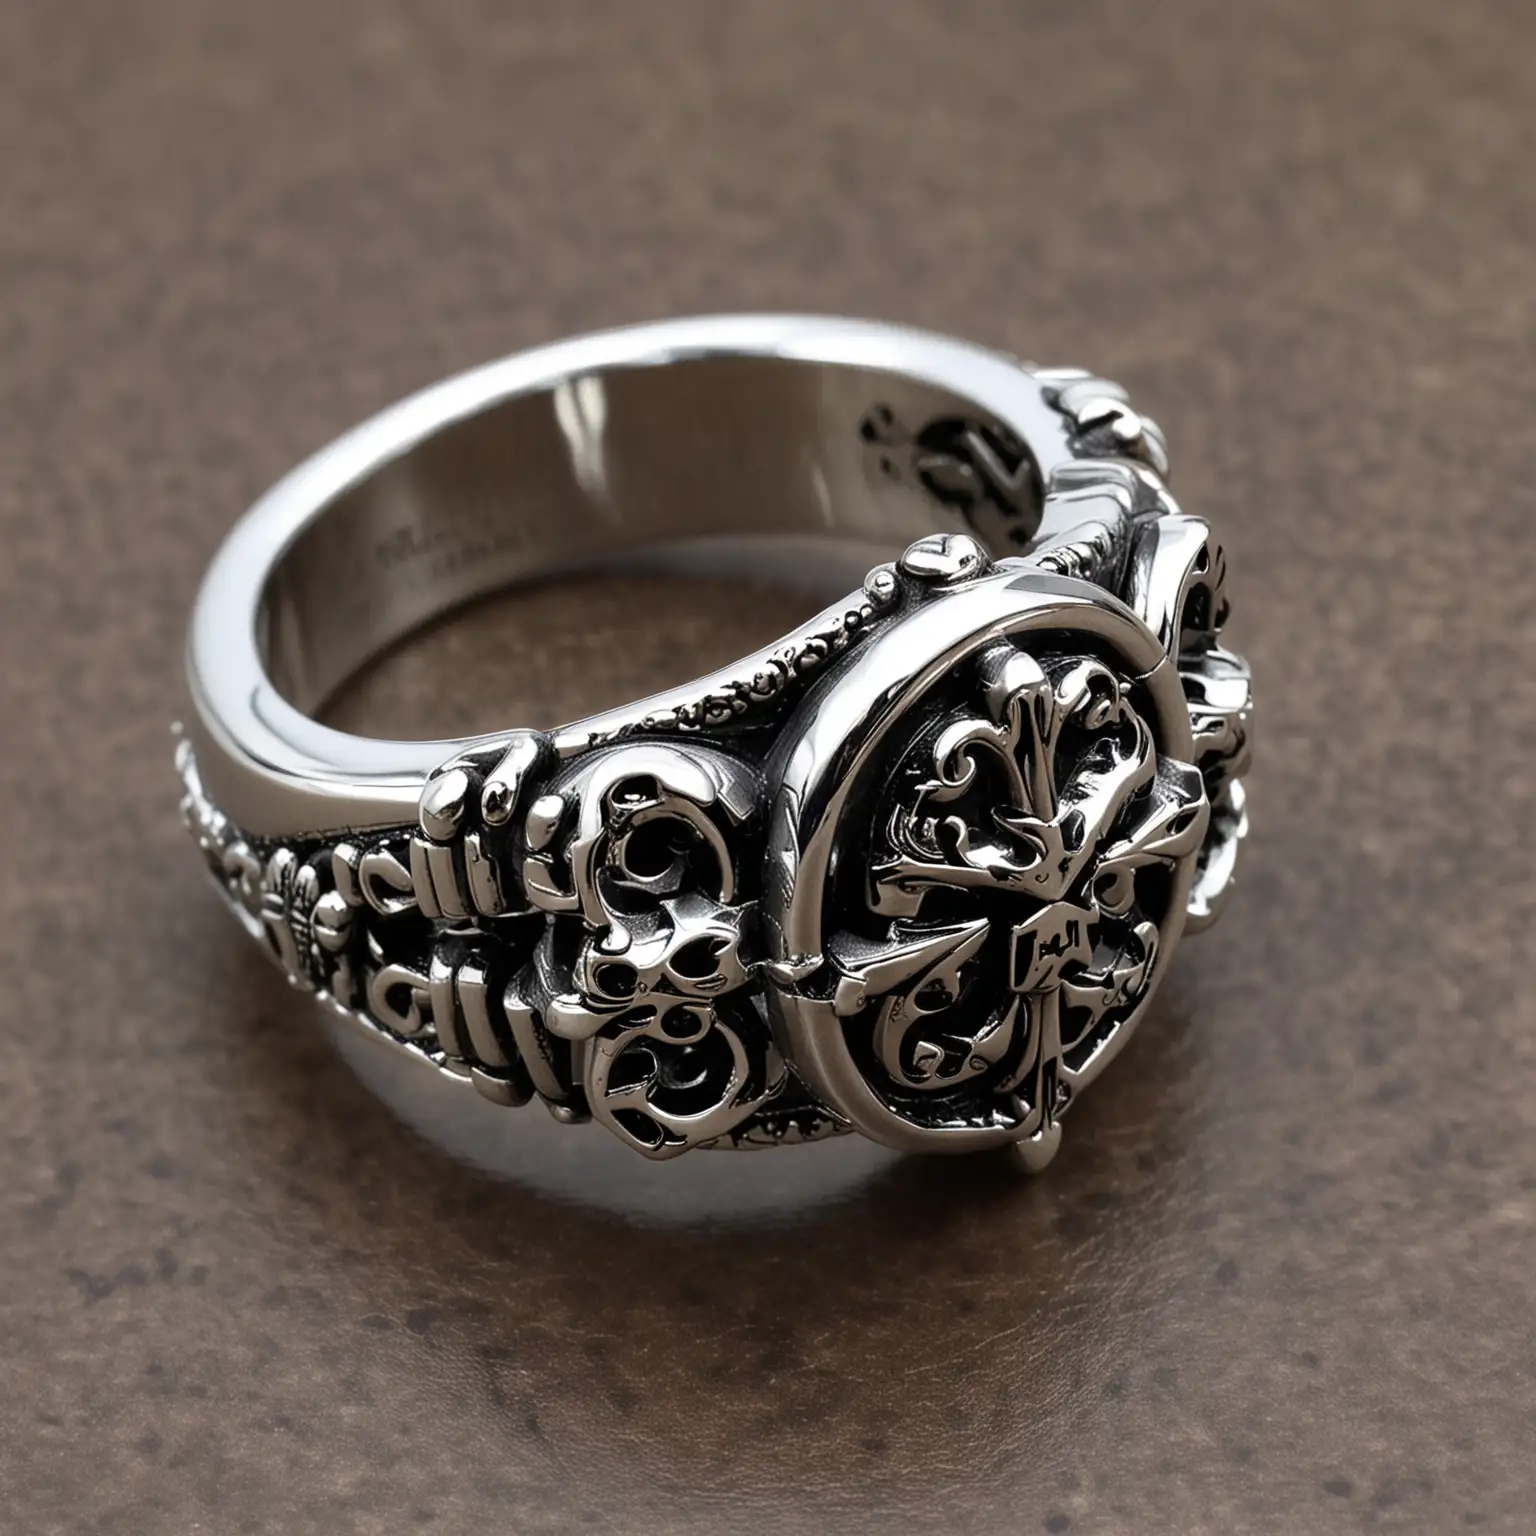 Gothic Chrome Hearts Style Ring with Intricate Detailing